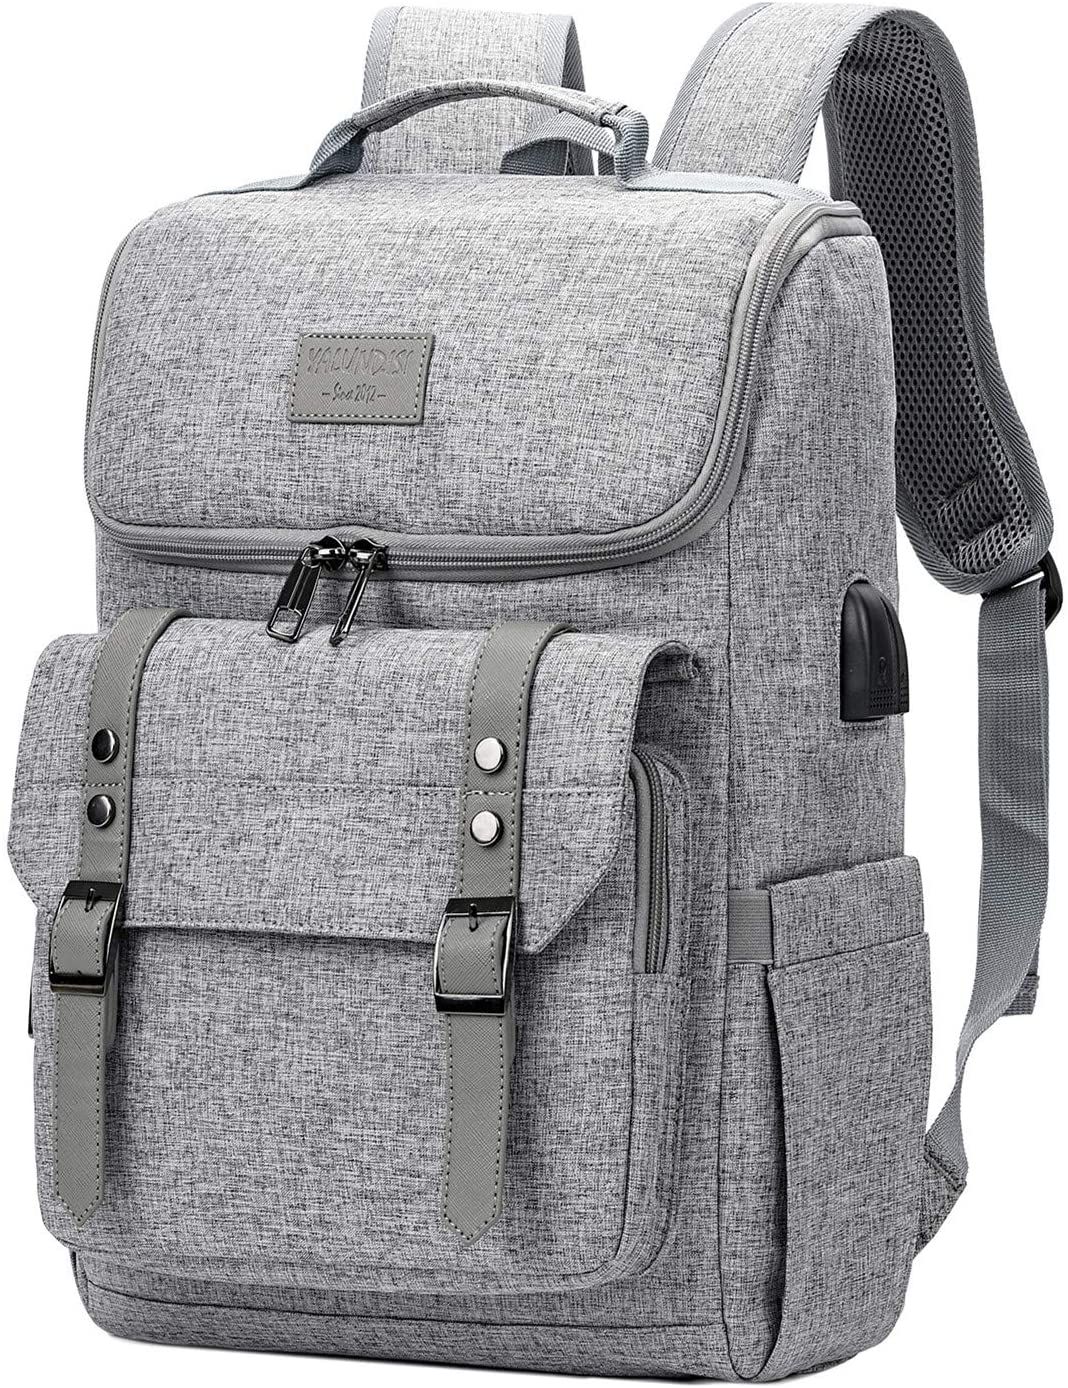 lubardy travel backpack review